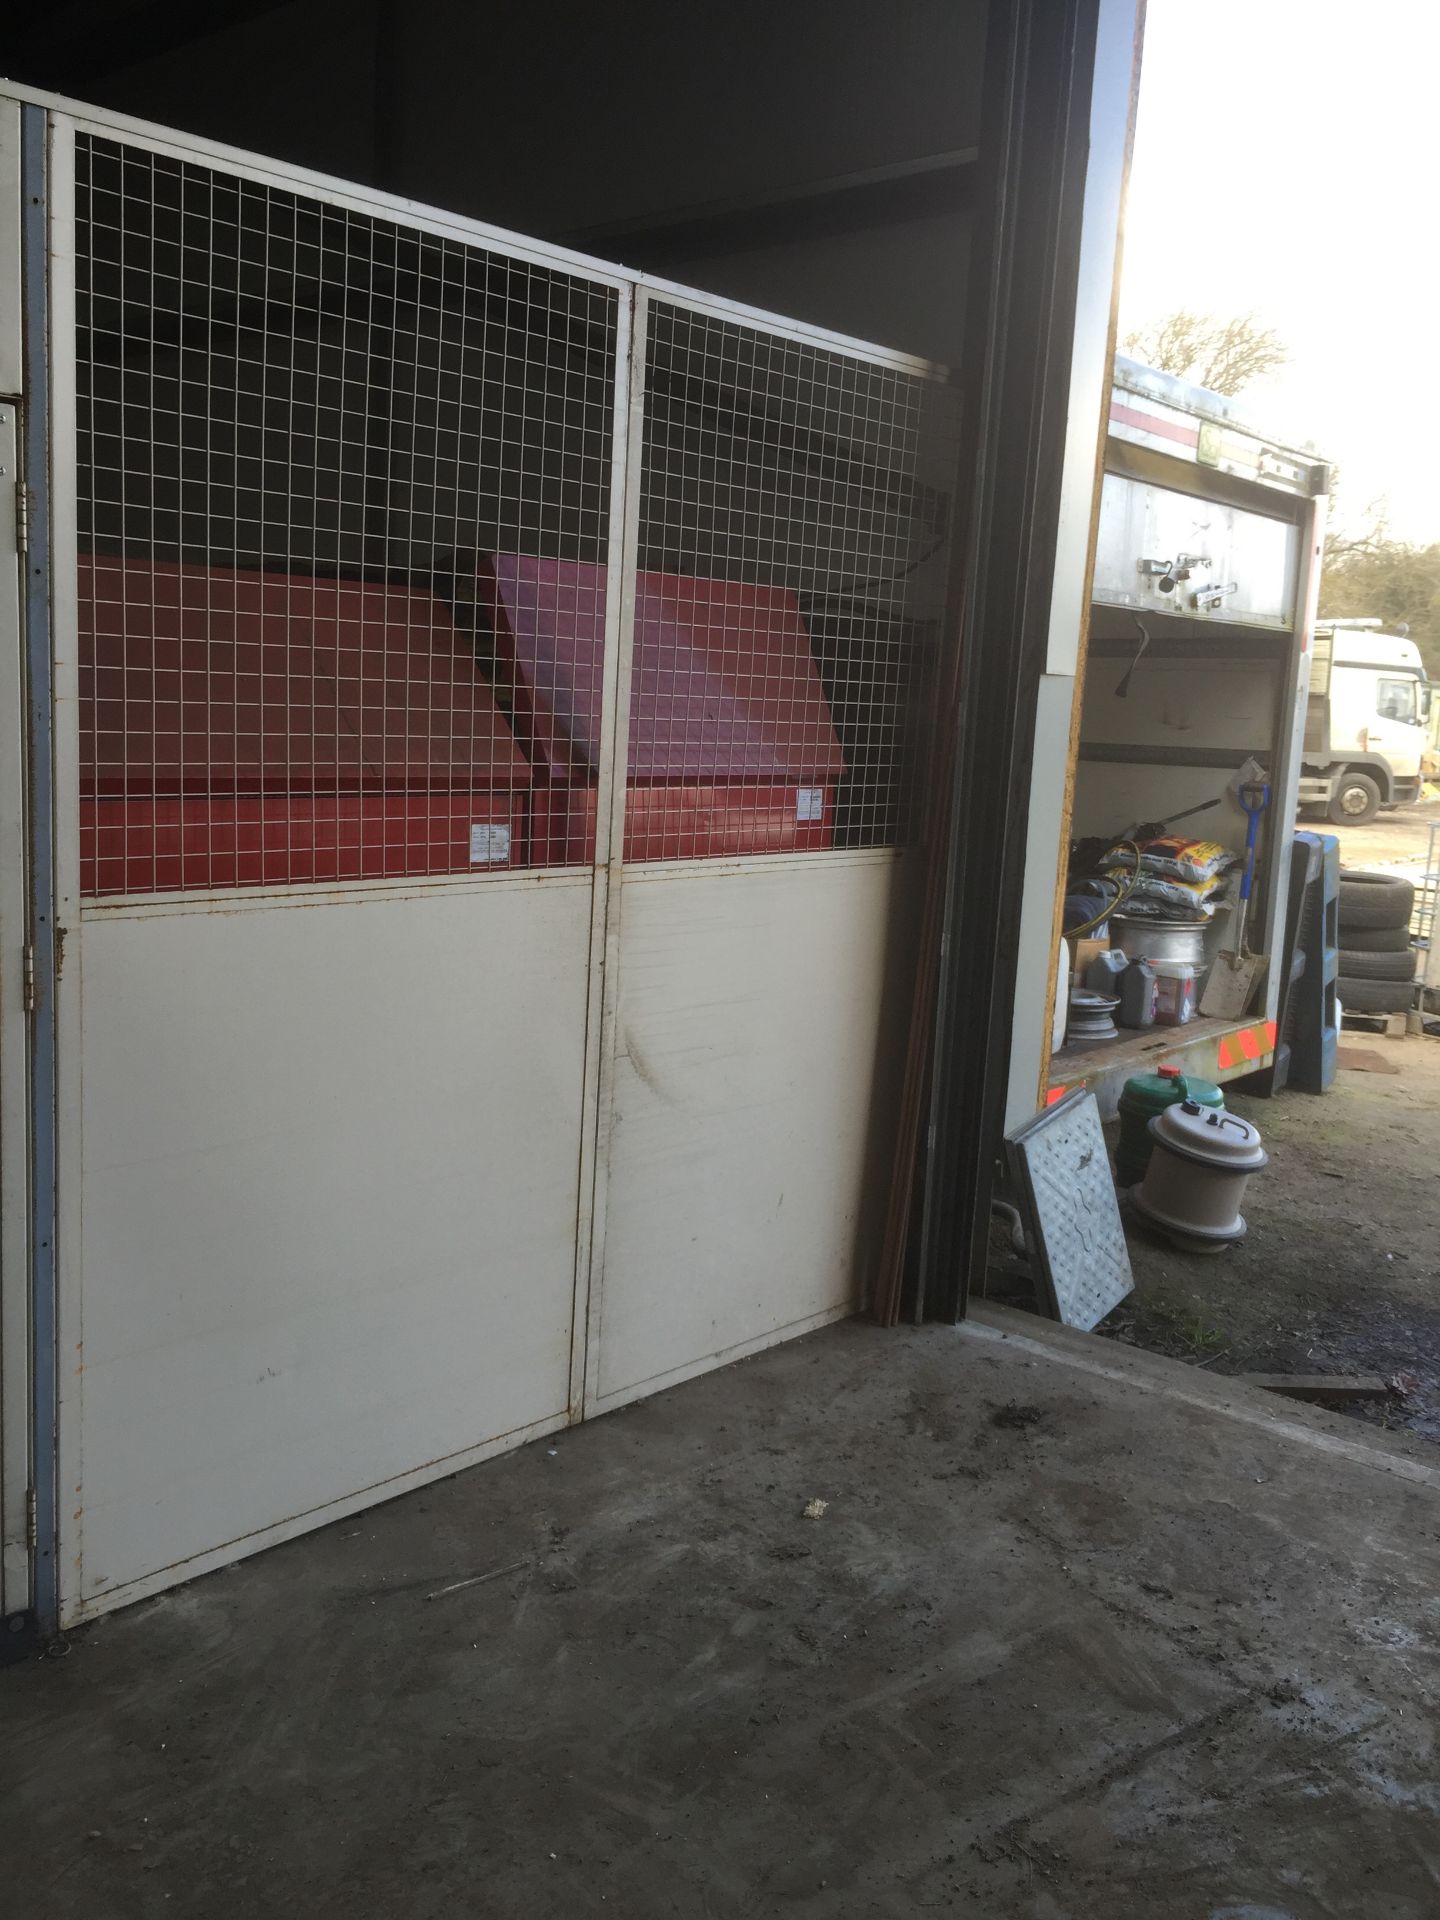 10 x Mesh/Panelled Warehouse partition Walls - 1200mm x 2440mm  - Can be connected to make various